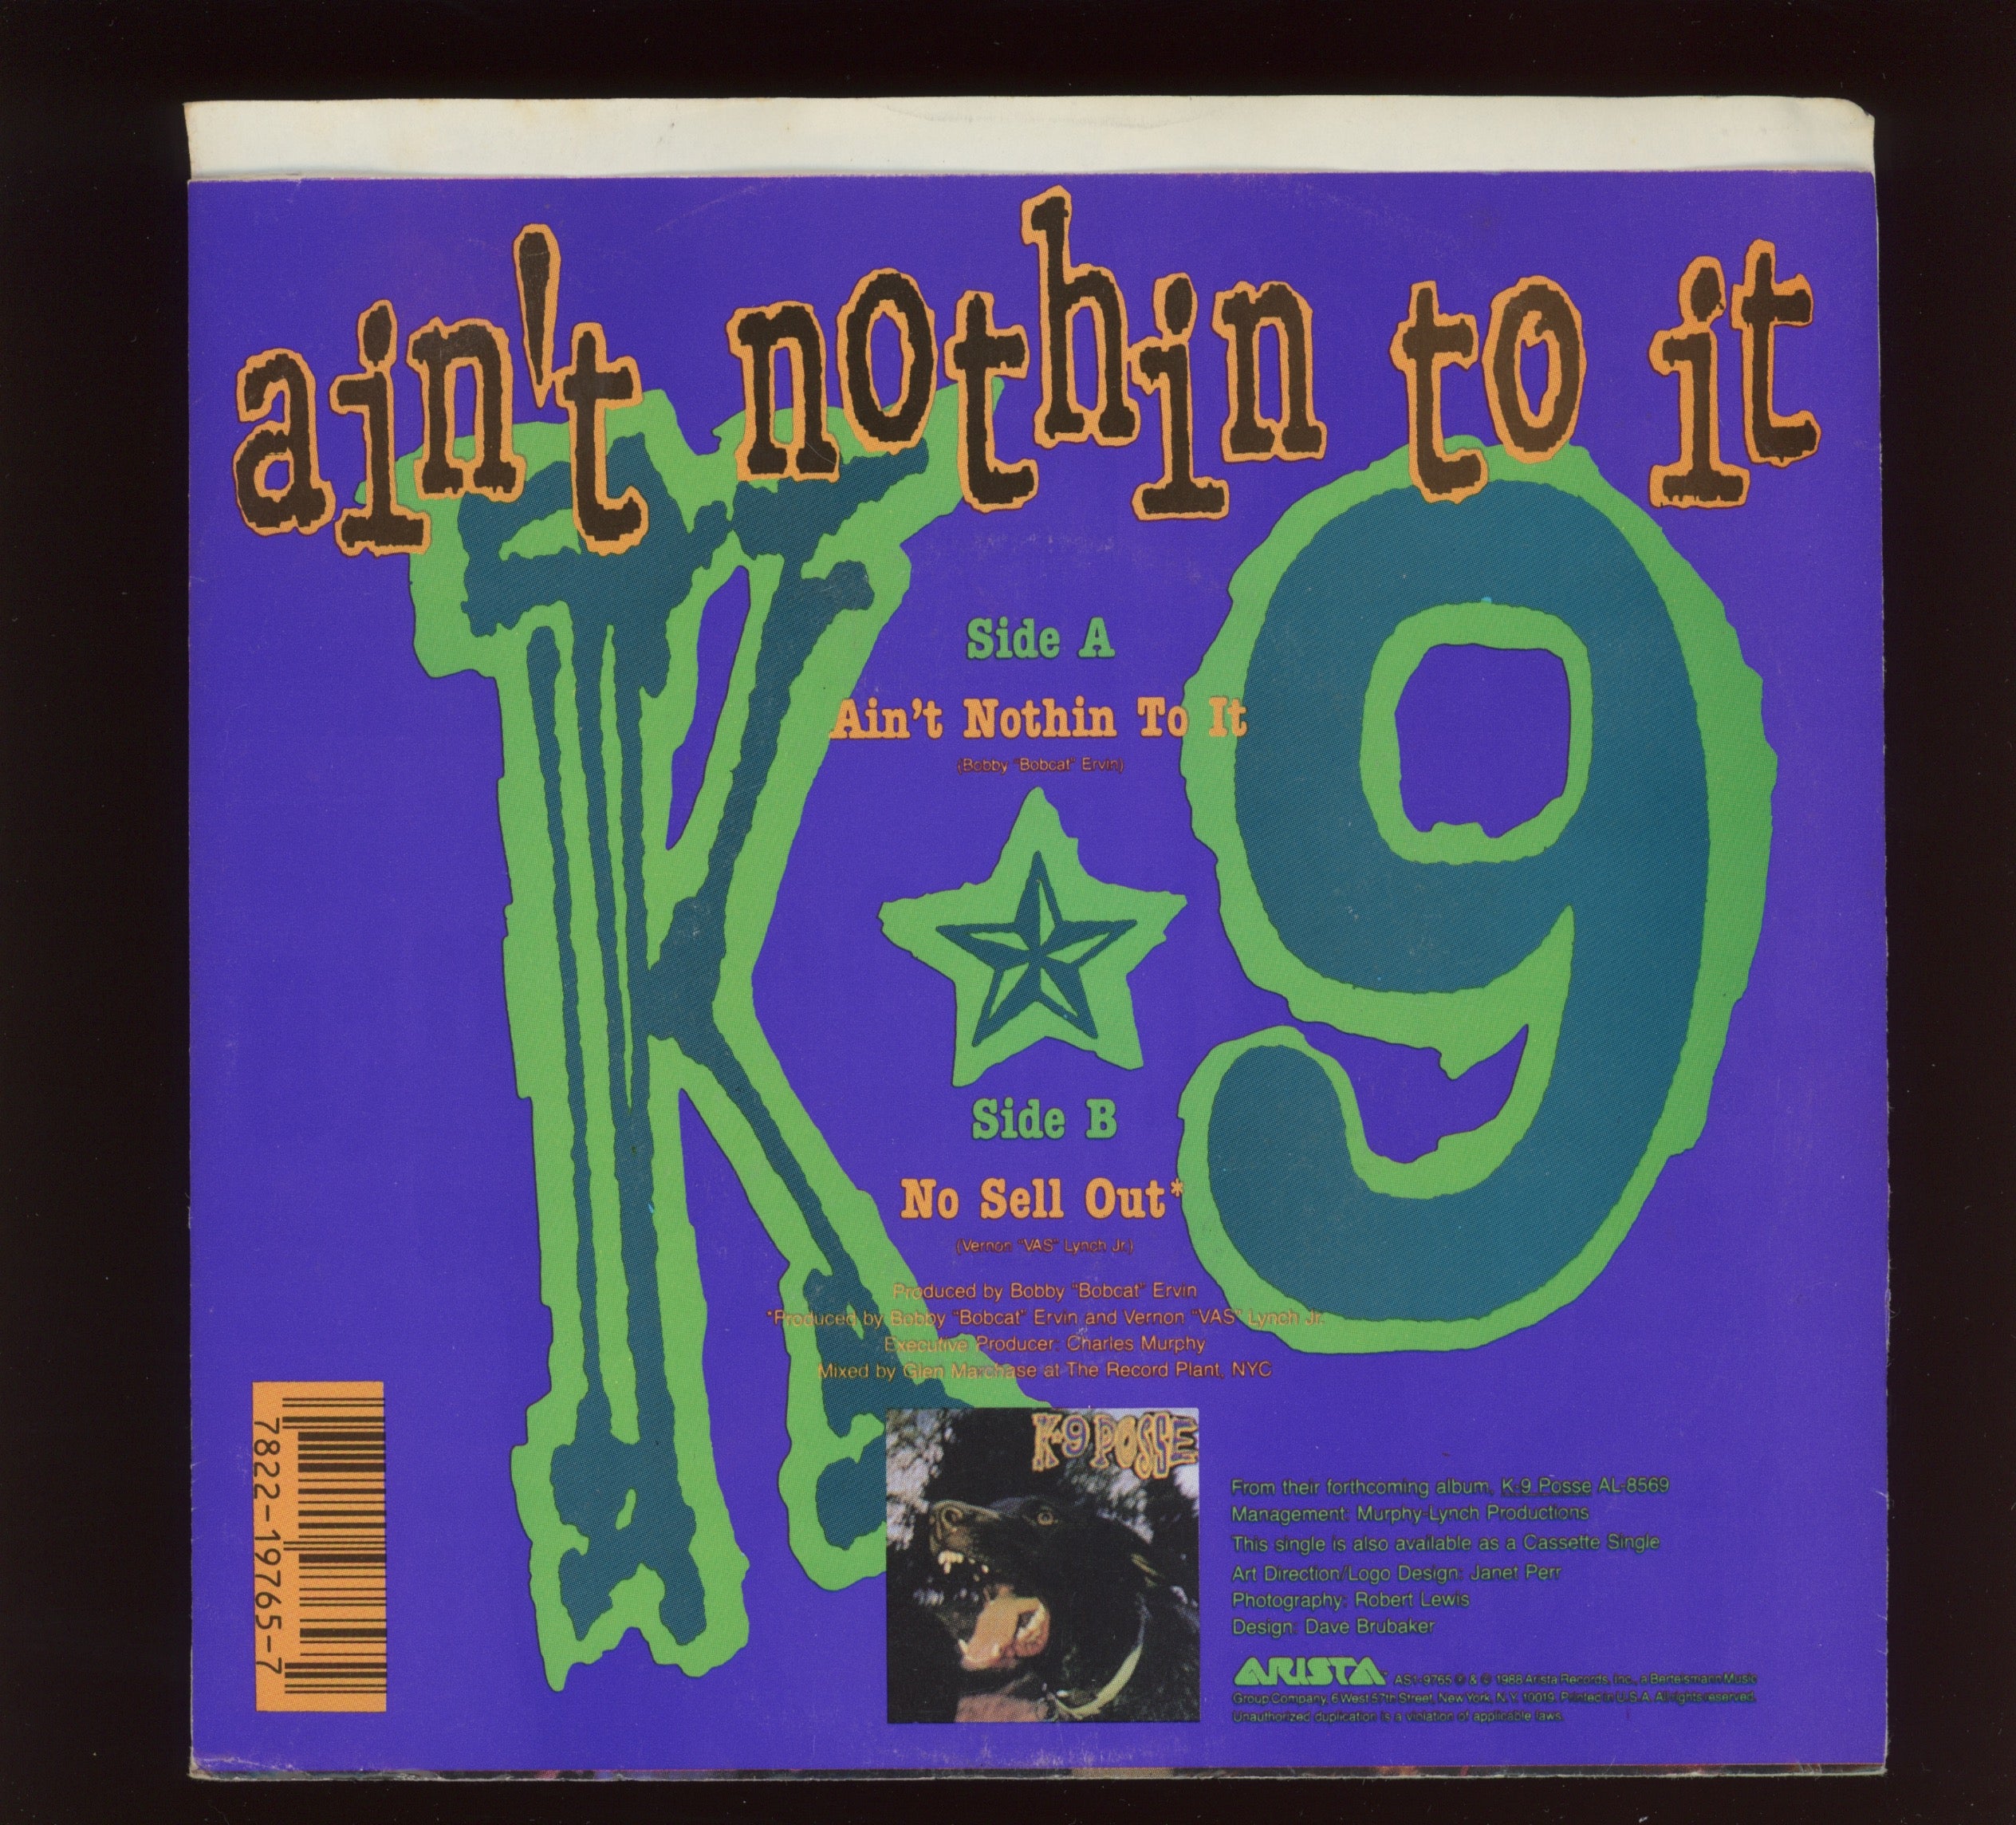 K-9 Posse - Ain't Nothin To It on Arista With Picture Sleeve